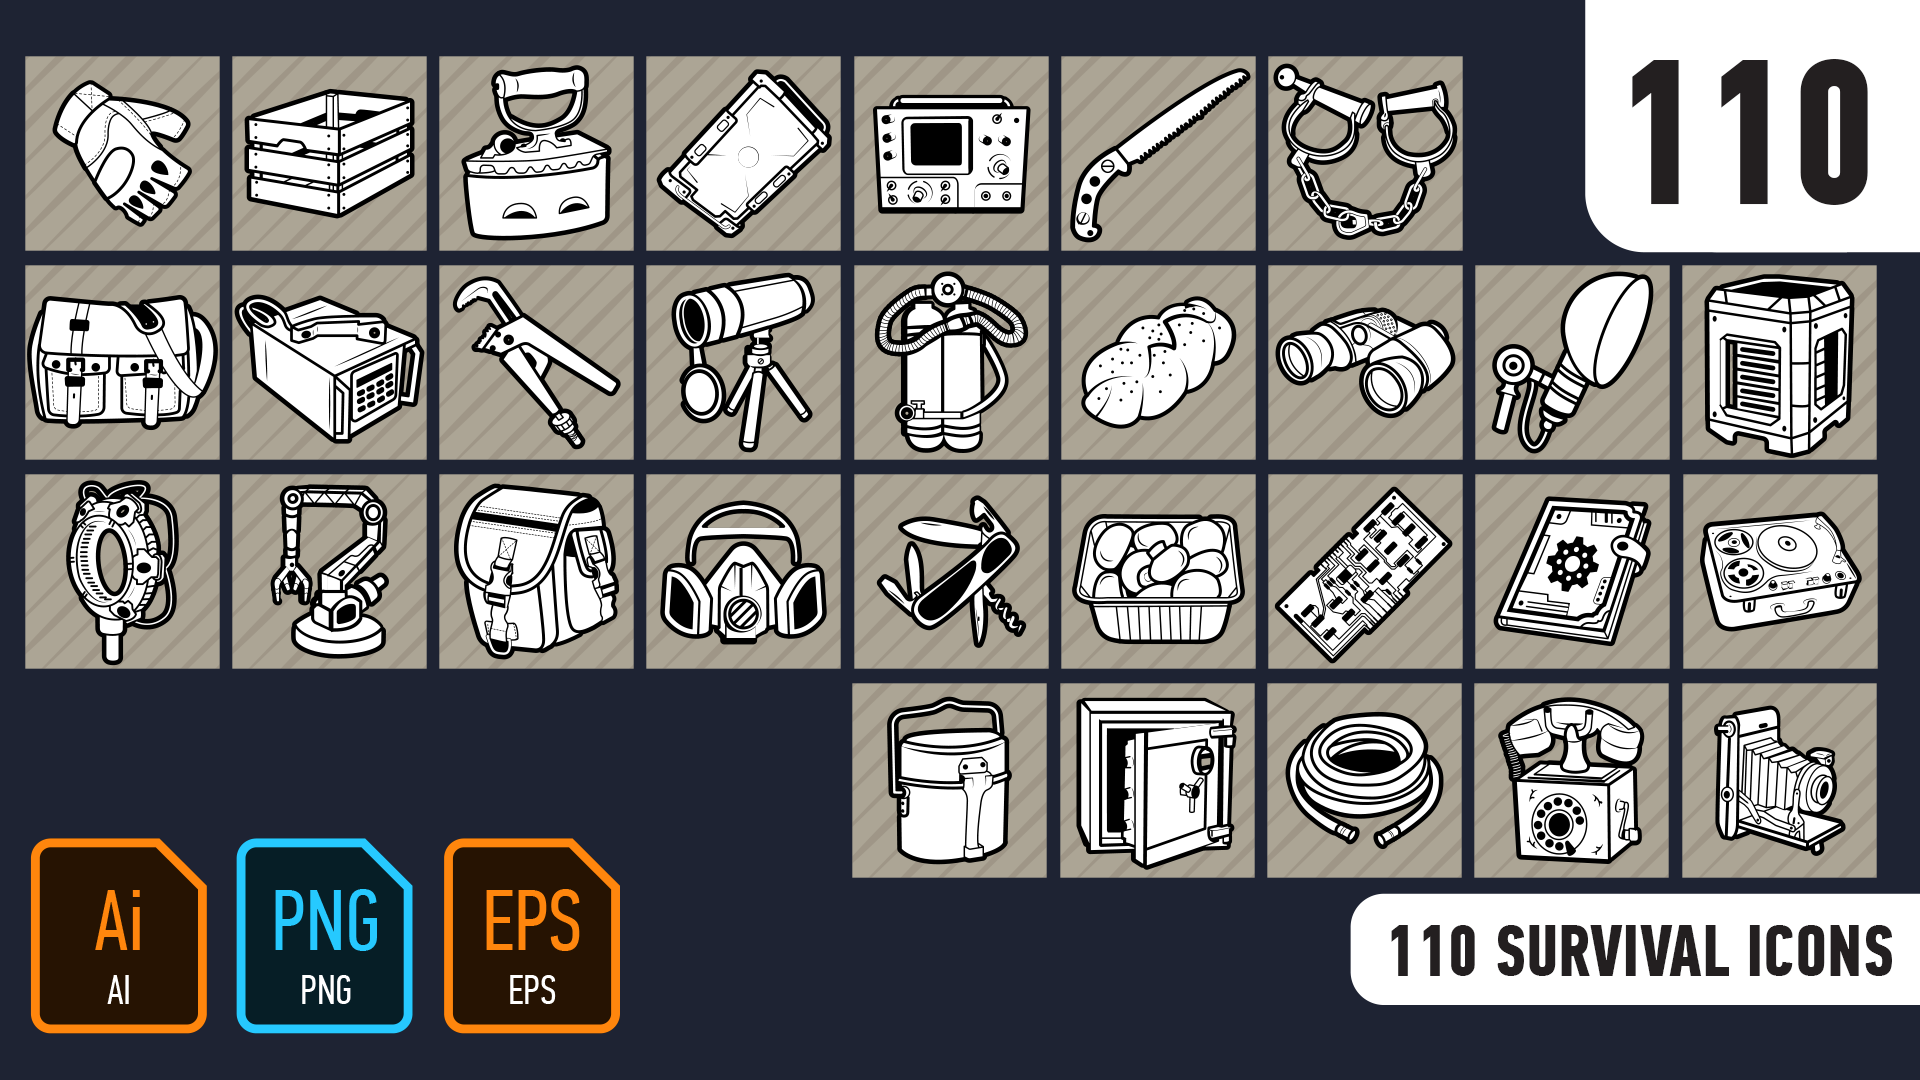 110 survival icons